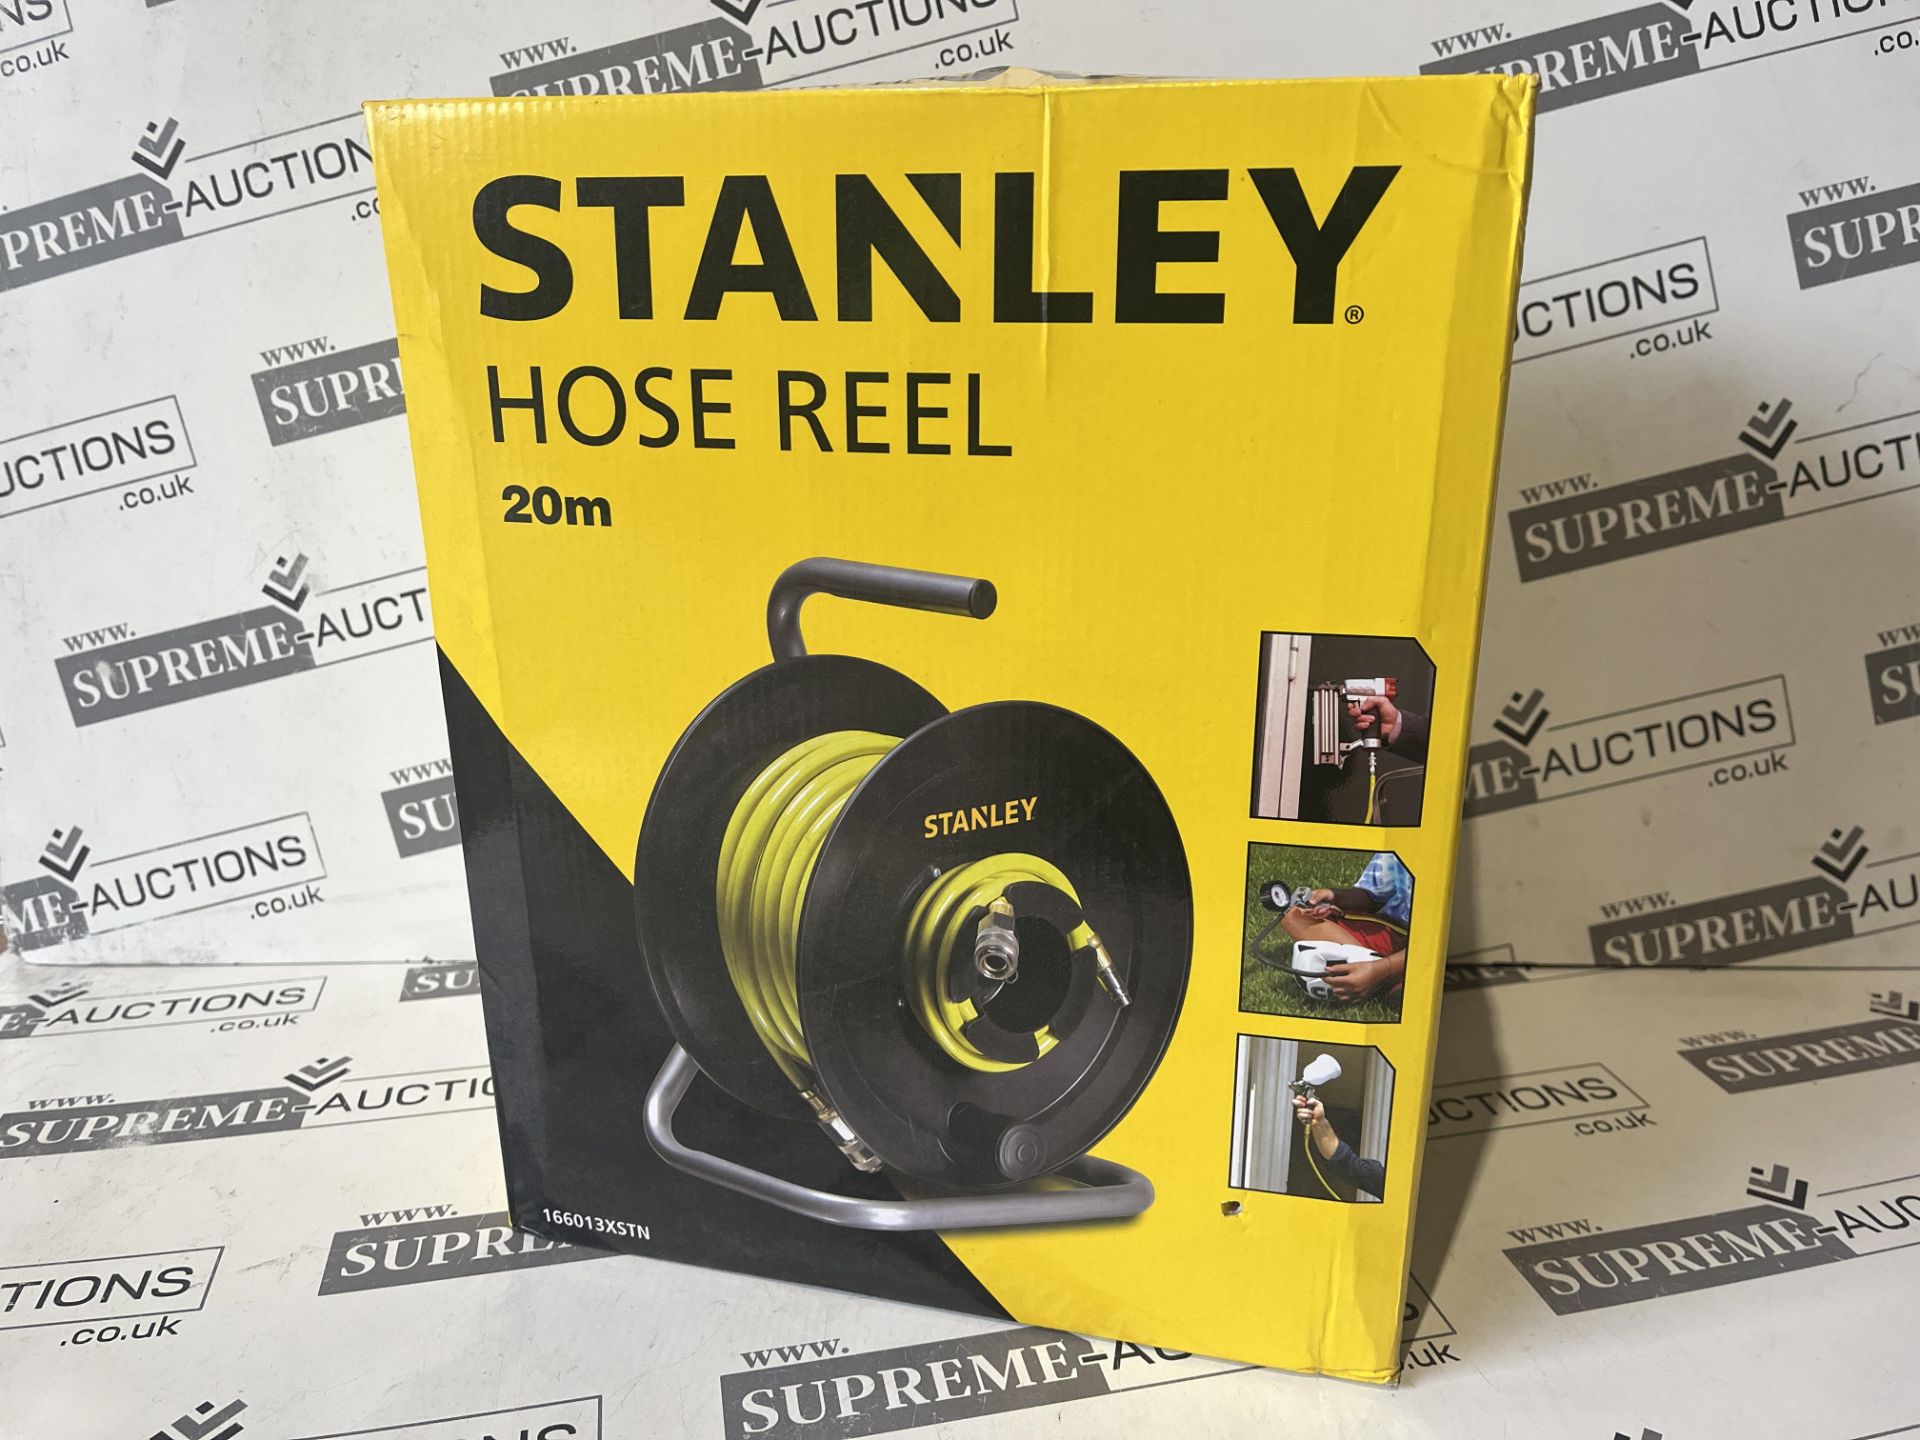 2 X Brand New Stanley Compressed Air Hose Reel 20 meters, With pneumatic quick coupling and - Bild 6 aus 6